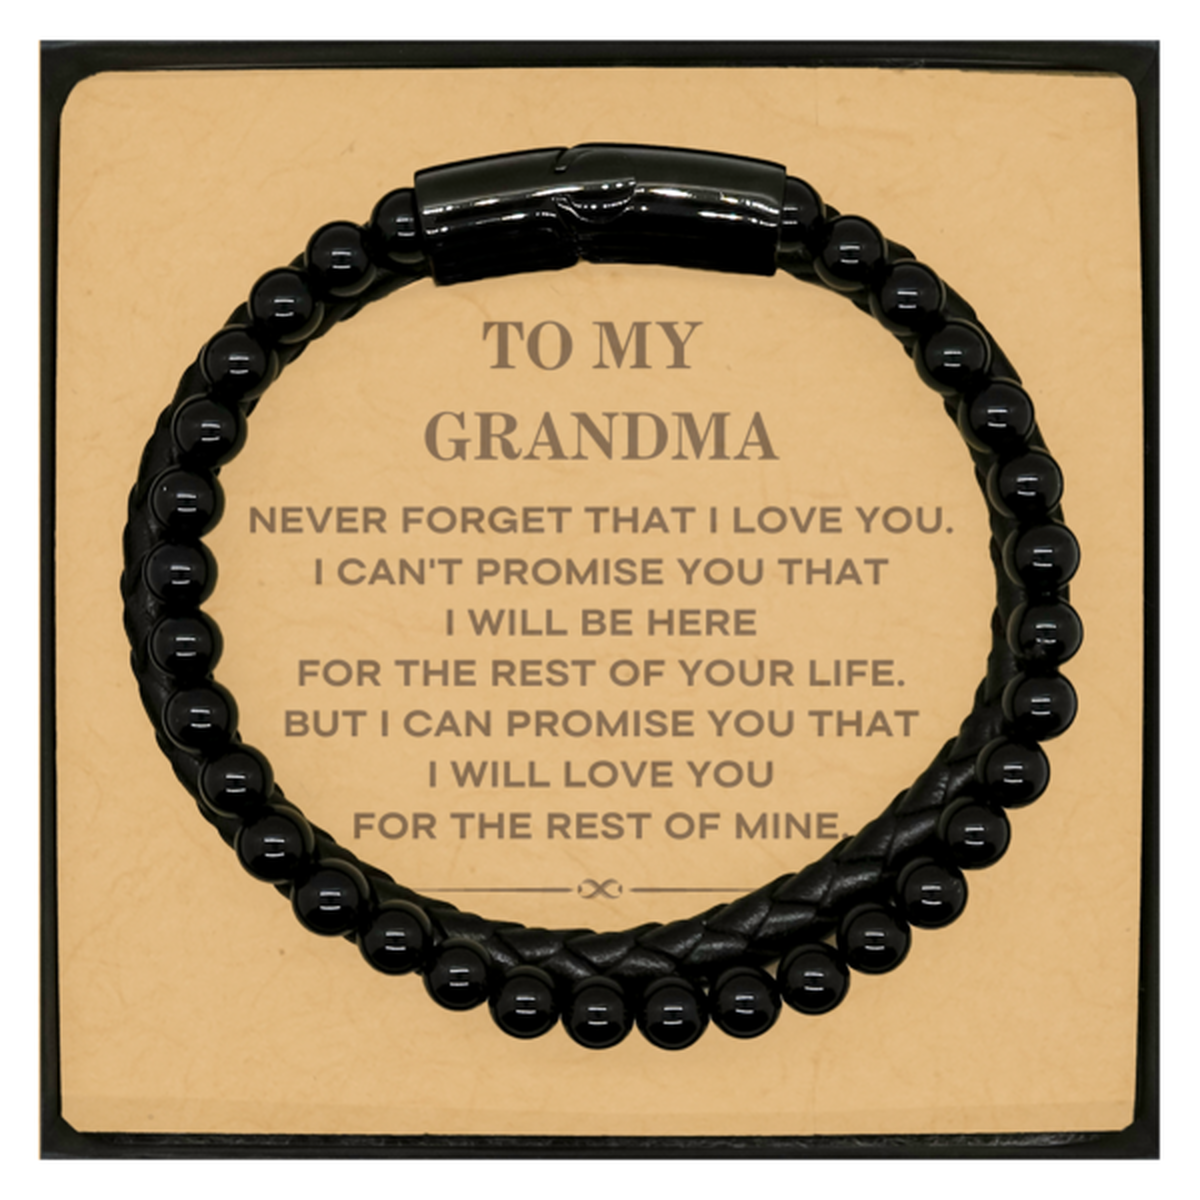 To My Grandma Gifts, I will love you for the rest of mine, Love Grandma Bracelet, Birthday Christmas Unique Stone Leather Bracelets For Grandma